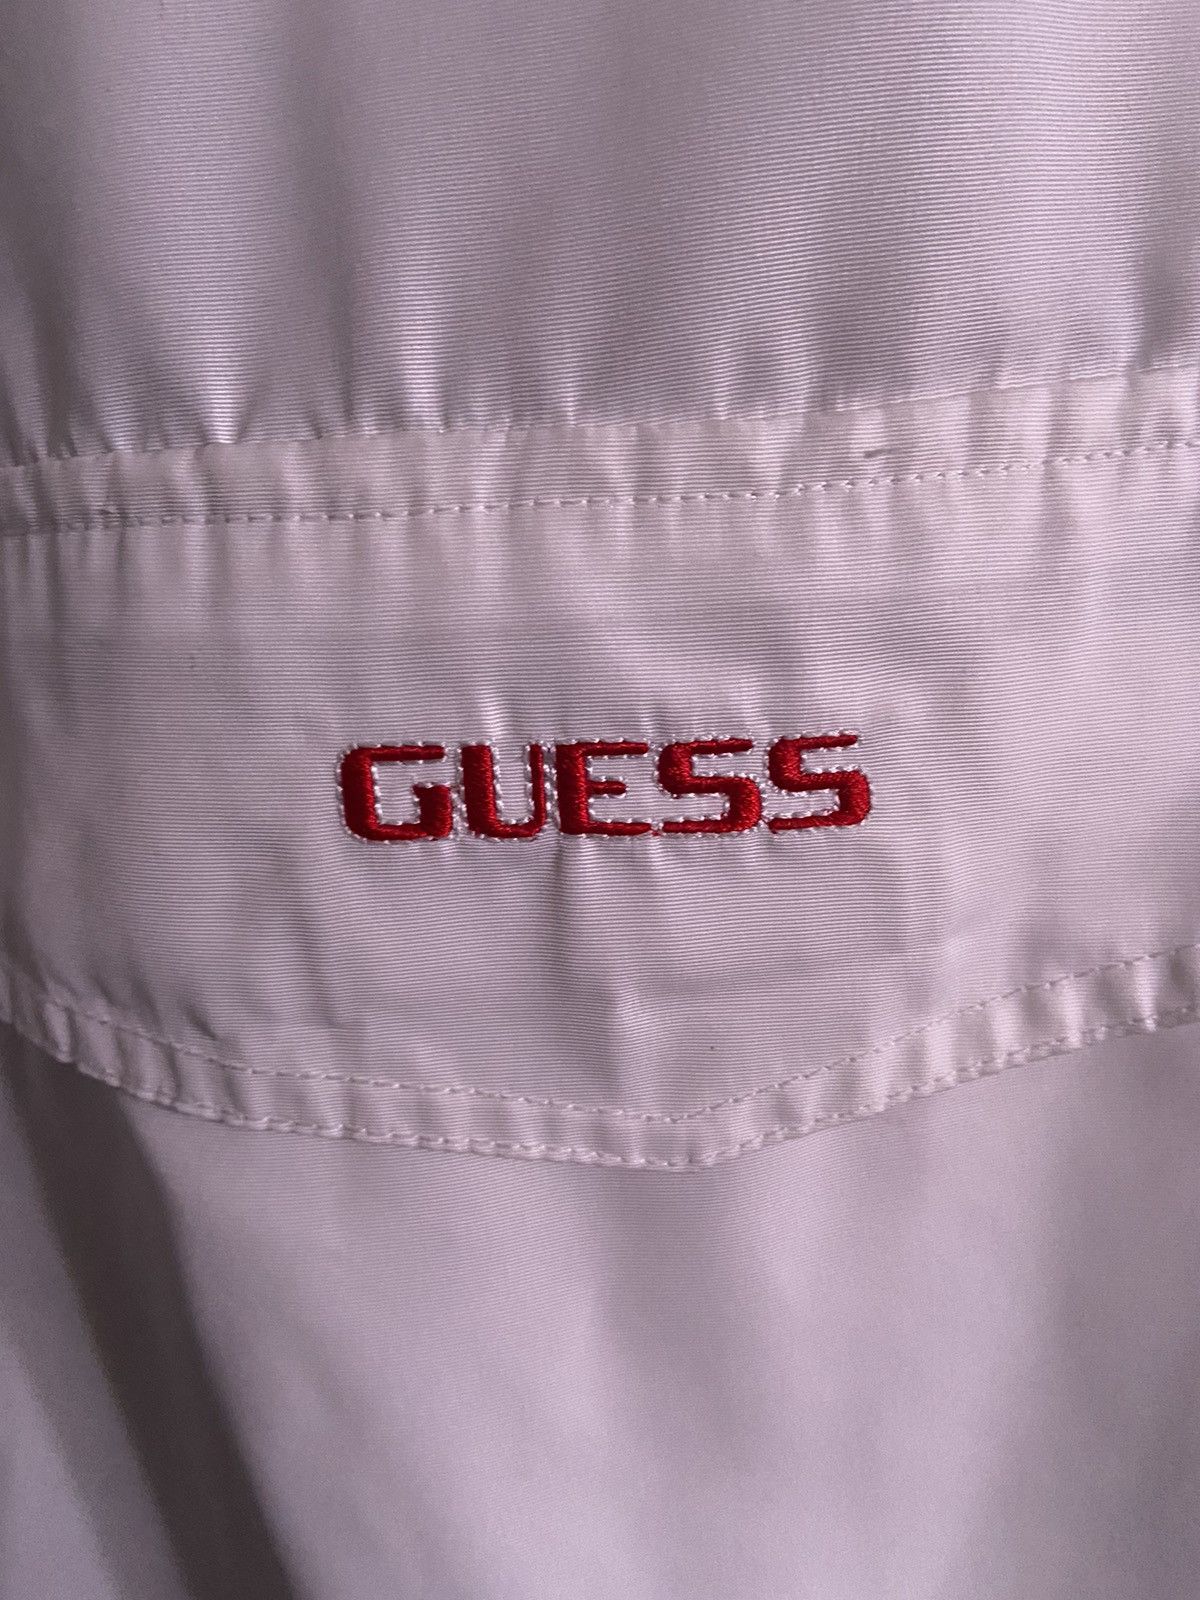 Guess Guess ComplexCon Sean WeatherSpoon Collab Anorak Size US M / EU 48-50 / 2 - 6 Thumbnail